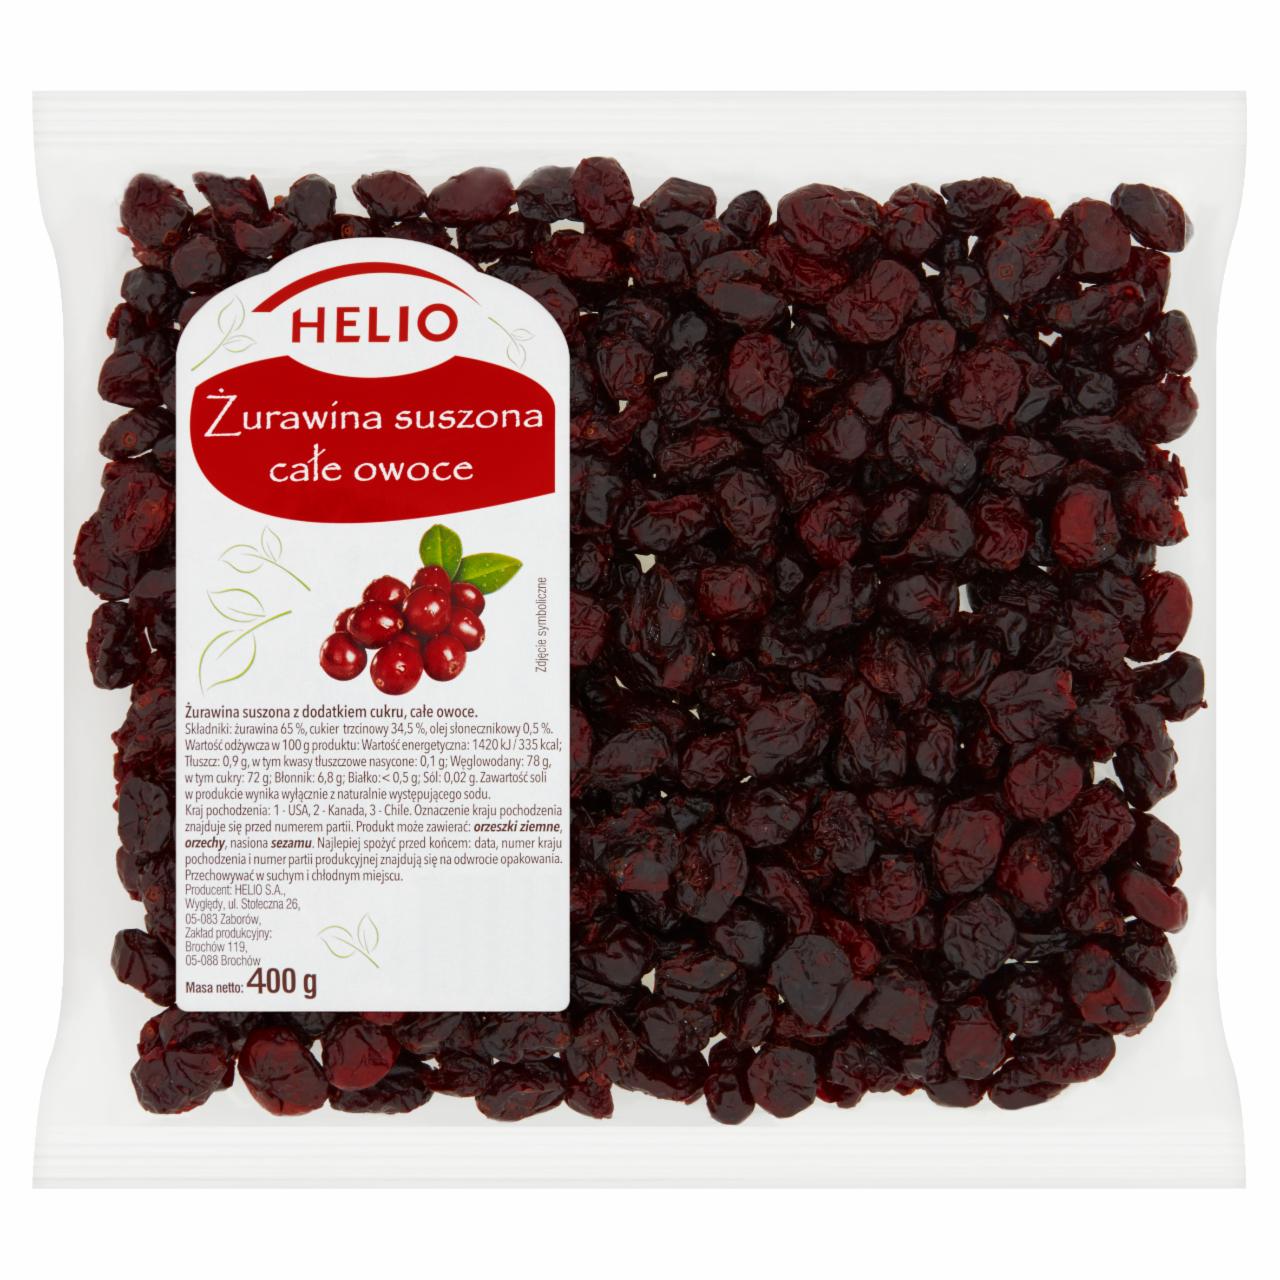 Photo - Helio Whole Dried Cranberry 400 g